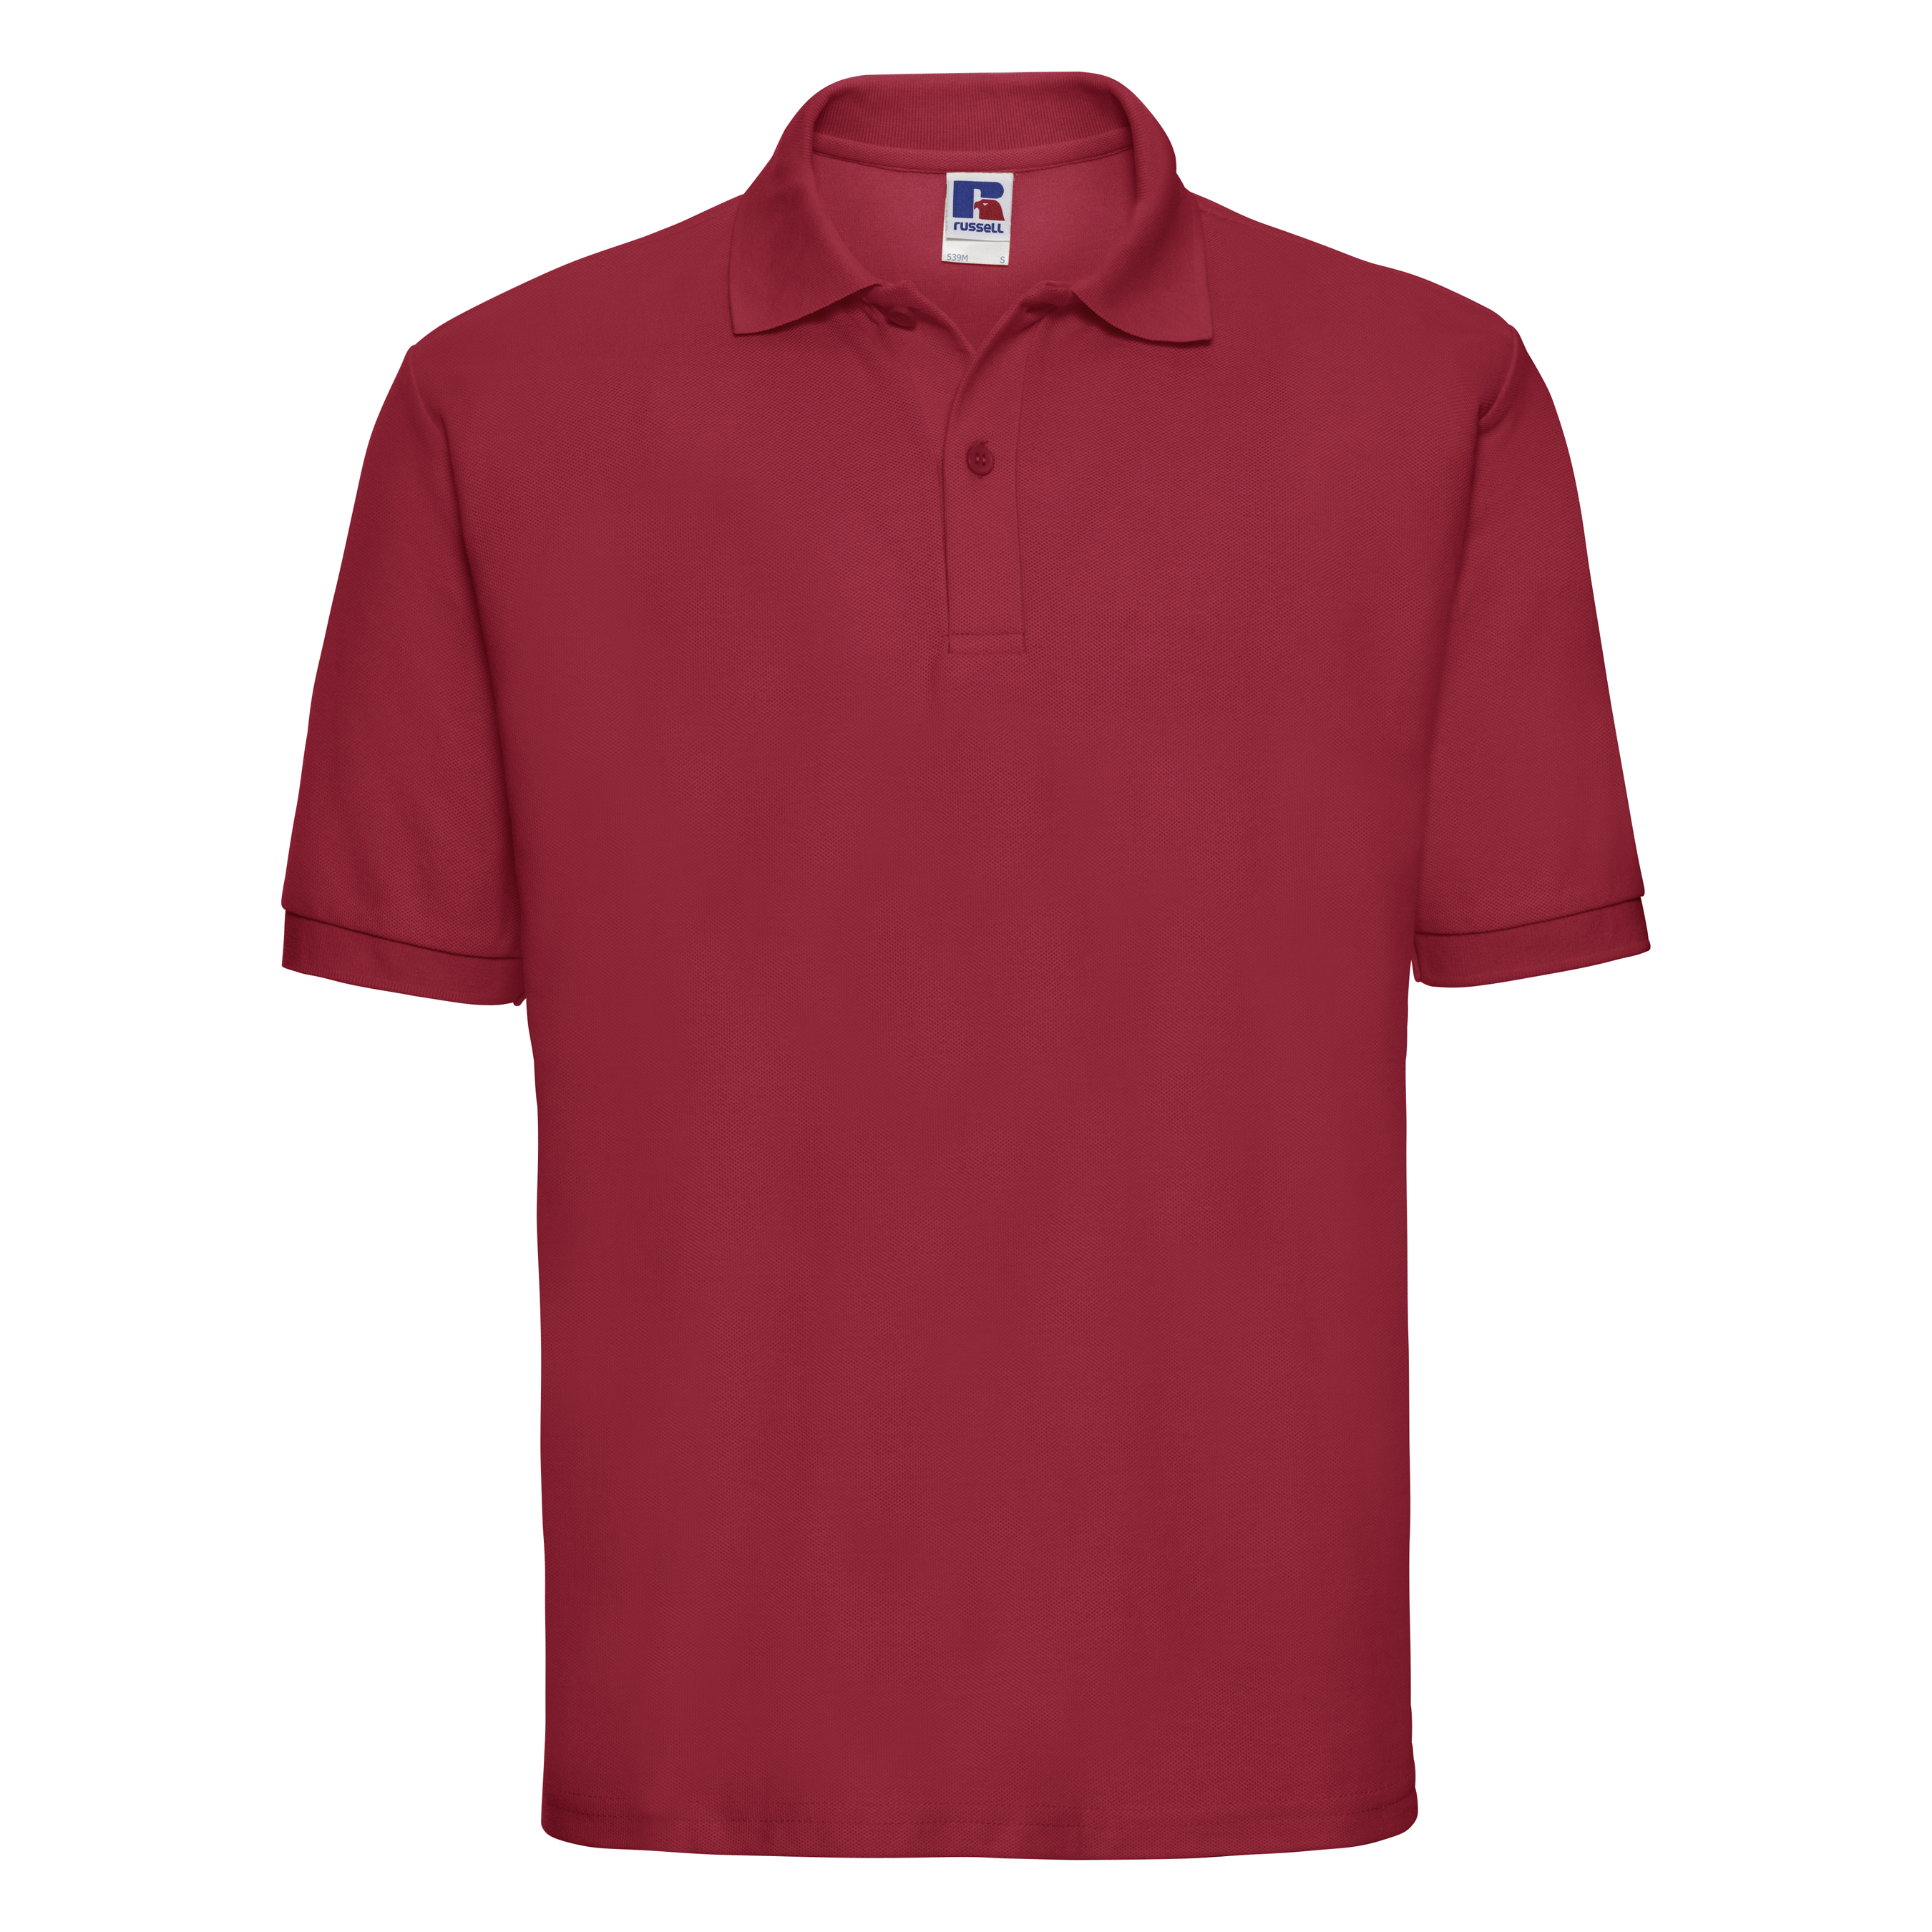 ax-httpswebsystems.s3.amazonaws.comtmp_for_downloadrussell-classic-polycotton-polo-classic-red.jpg